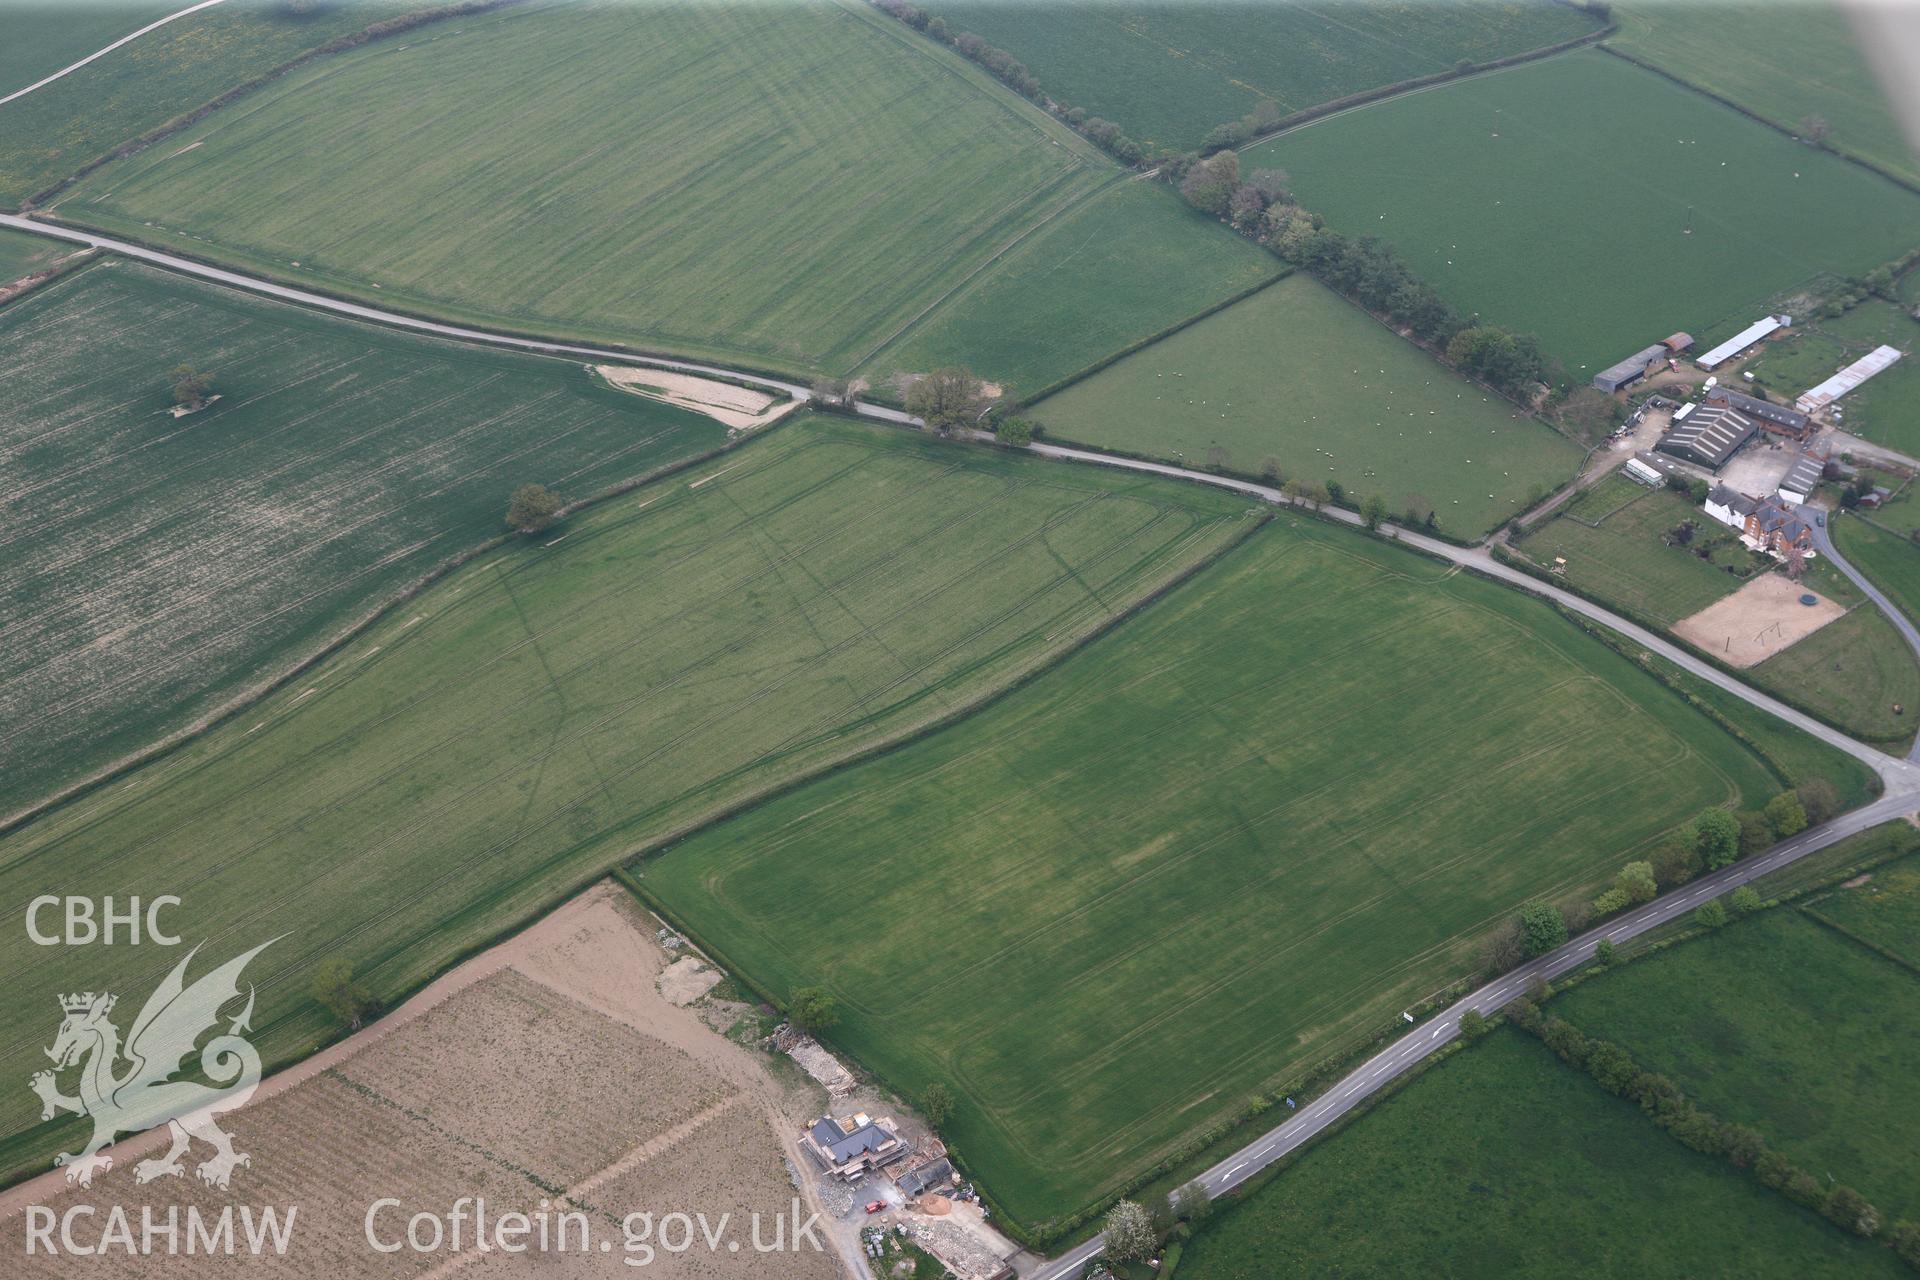 RCAHMW colour oblique photograph of Brompton or Pentrehyling Roman marching camps. Taken by Toby Driver on 26/04/2011.